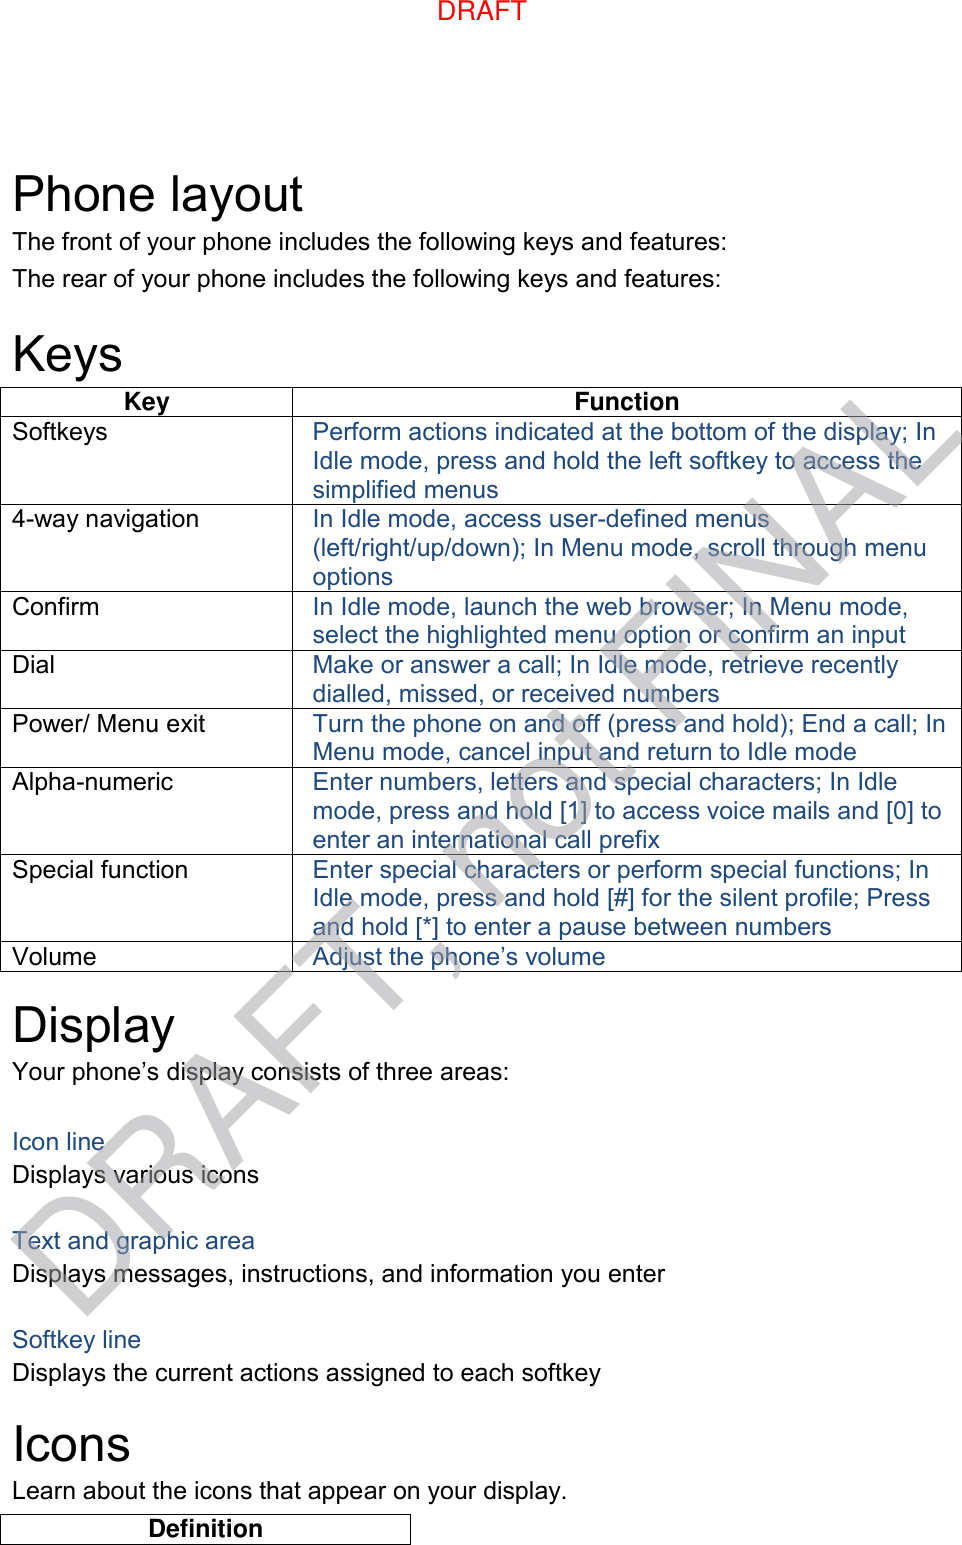  Phone layout The front of your phone includes the following keys and features: The rear of your phone includes the following keys and features:  Keys Key Function Softkeys Perform actions indicated at the bottom of the display; In Idle mode, press and hold the left softkey to access the simplified menus 4-way navigation In Idle mode, access user-defined menus (left/right/up/down); In Menu mode, scroll through menu options Confirm In Idle mode, launch the web browser; In Menu mode, select the highlighted menu option or confirm an input Dial Make or answer a call; In Idle mode, retrieve recently dialled, missed, or received numbers Power/ Menu exit Turn the phone on and off (press and hold); End a call; In Menu mode, cancel input and return to Idle mode Alpha-numeric Enter numbers, letters and special characters; In Idle mode, press and hold [1] to access voice mails and [0] to enter an international call prefix Special function Enter special characters or perform special functions; In Idle mode, press and hold [#] for the silent profile; Press and hold [*] to enter a pause between numbers Volume Adjust the phone’s volume  Display Your phone’s display consists of three areas:  Icon line Displays various icons  Text and graphic area Displays messages, instructions, and information you enter  Softkey line Displays the current actions assigned to each softkey  Icons Learn about the icons that appear on your display. Definition DRAFTDRAFT, not FINAL